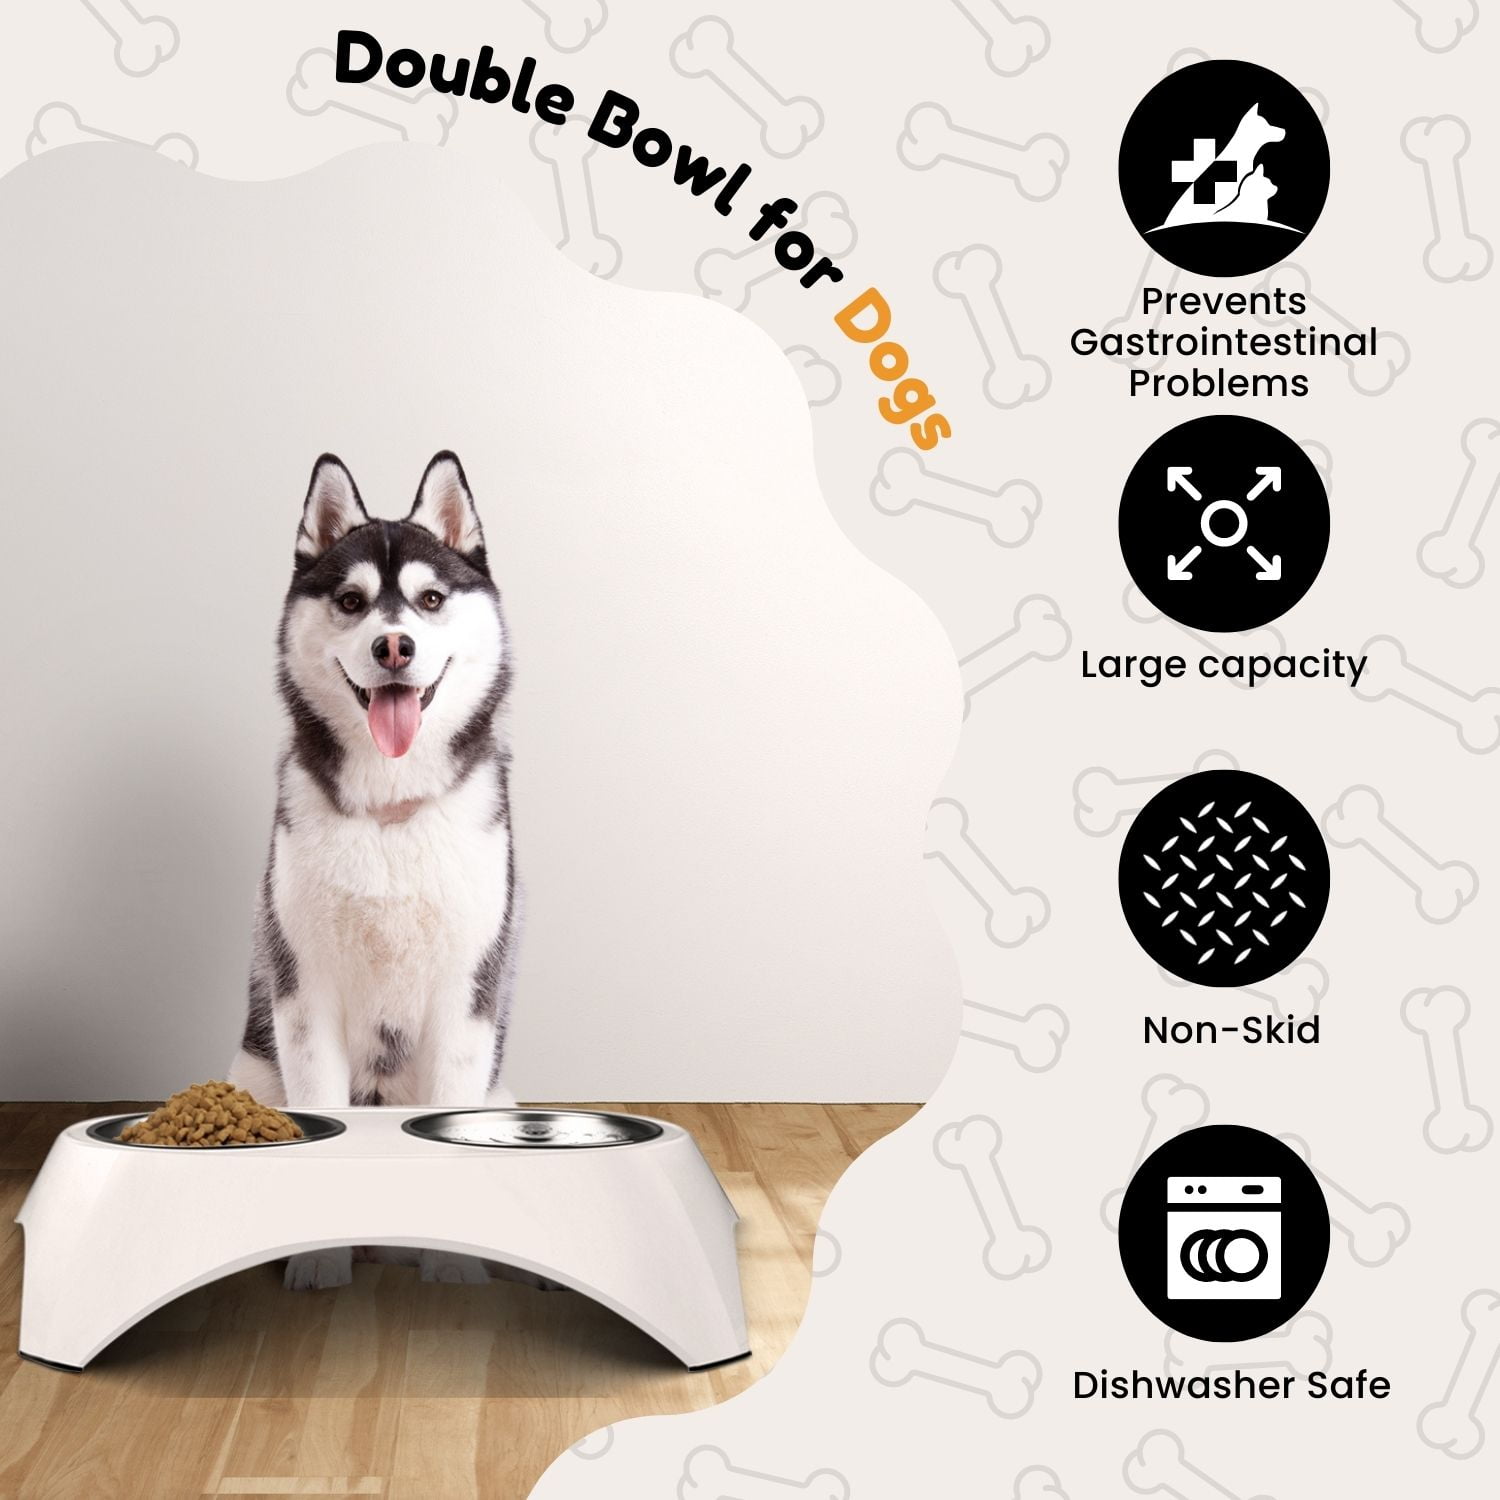 Pet Feeder Bowls Double Stainless Steel (Set of 2) - Removable Raised Feeding  Station Tray Dog Puppies Animal Food Water Holder Container Dish Table  Dinner Set with Elevated Stand (Orange) 